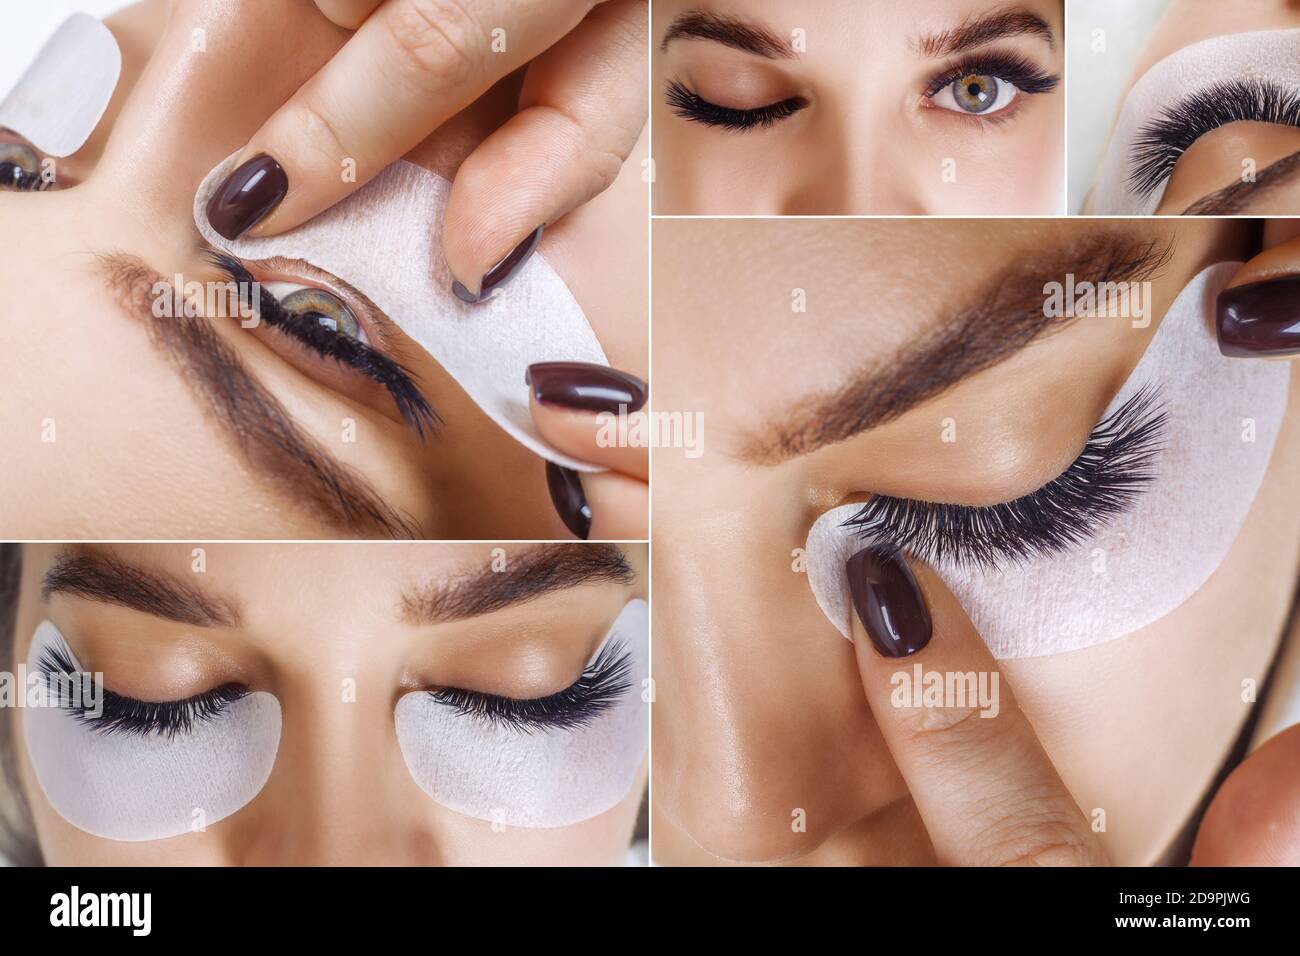 Eyelash extension procedure. Beautiful Woman with long lashes in a beauty salon. Collage. Stock Photo